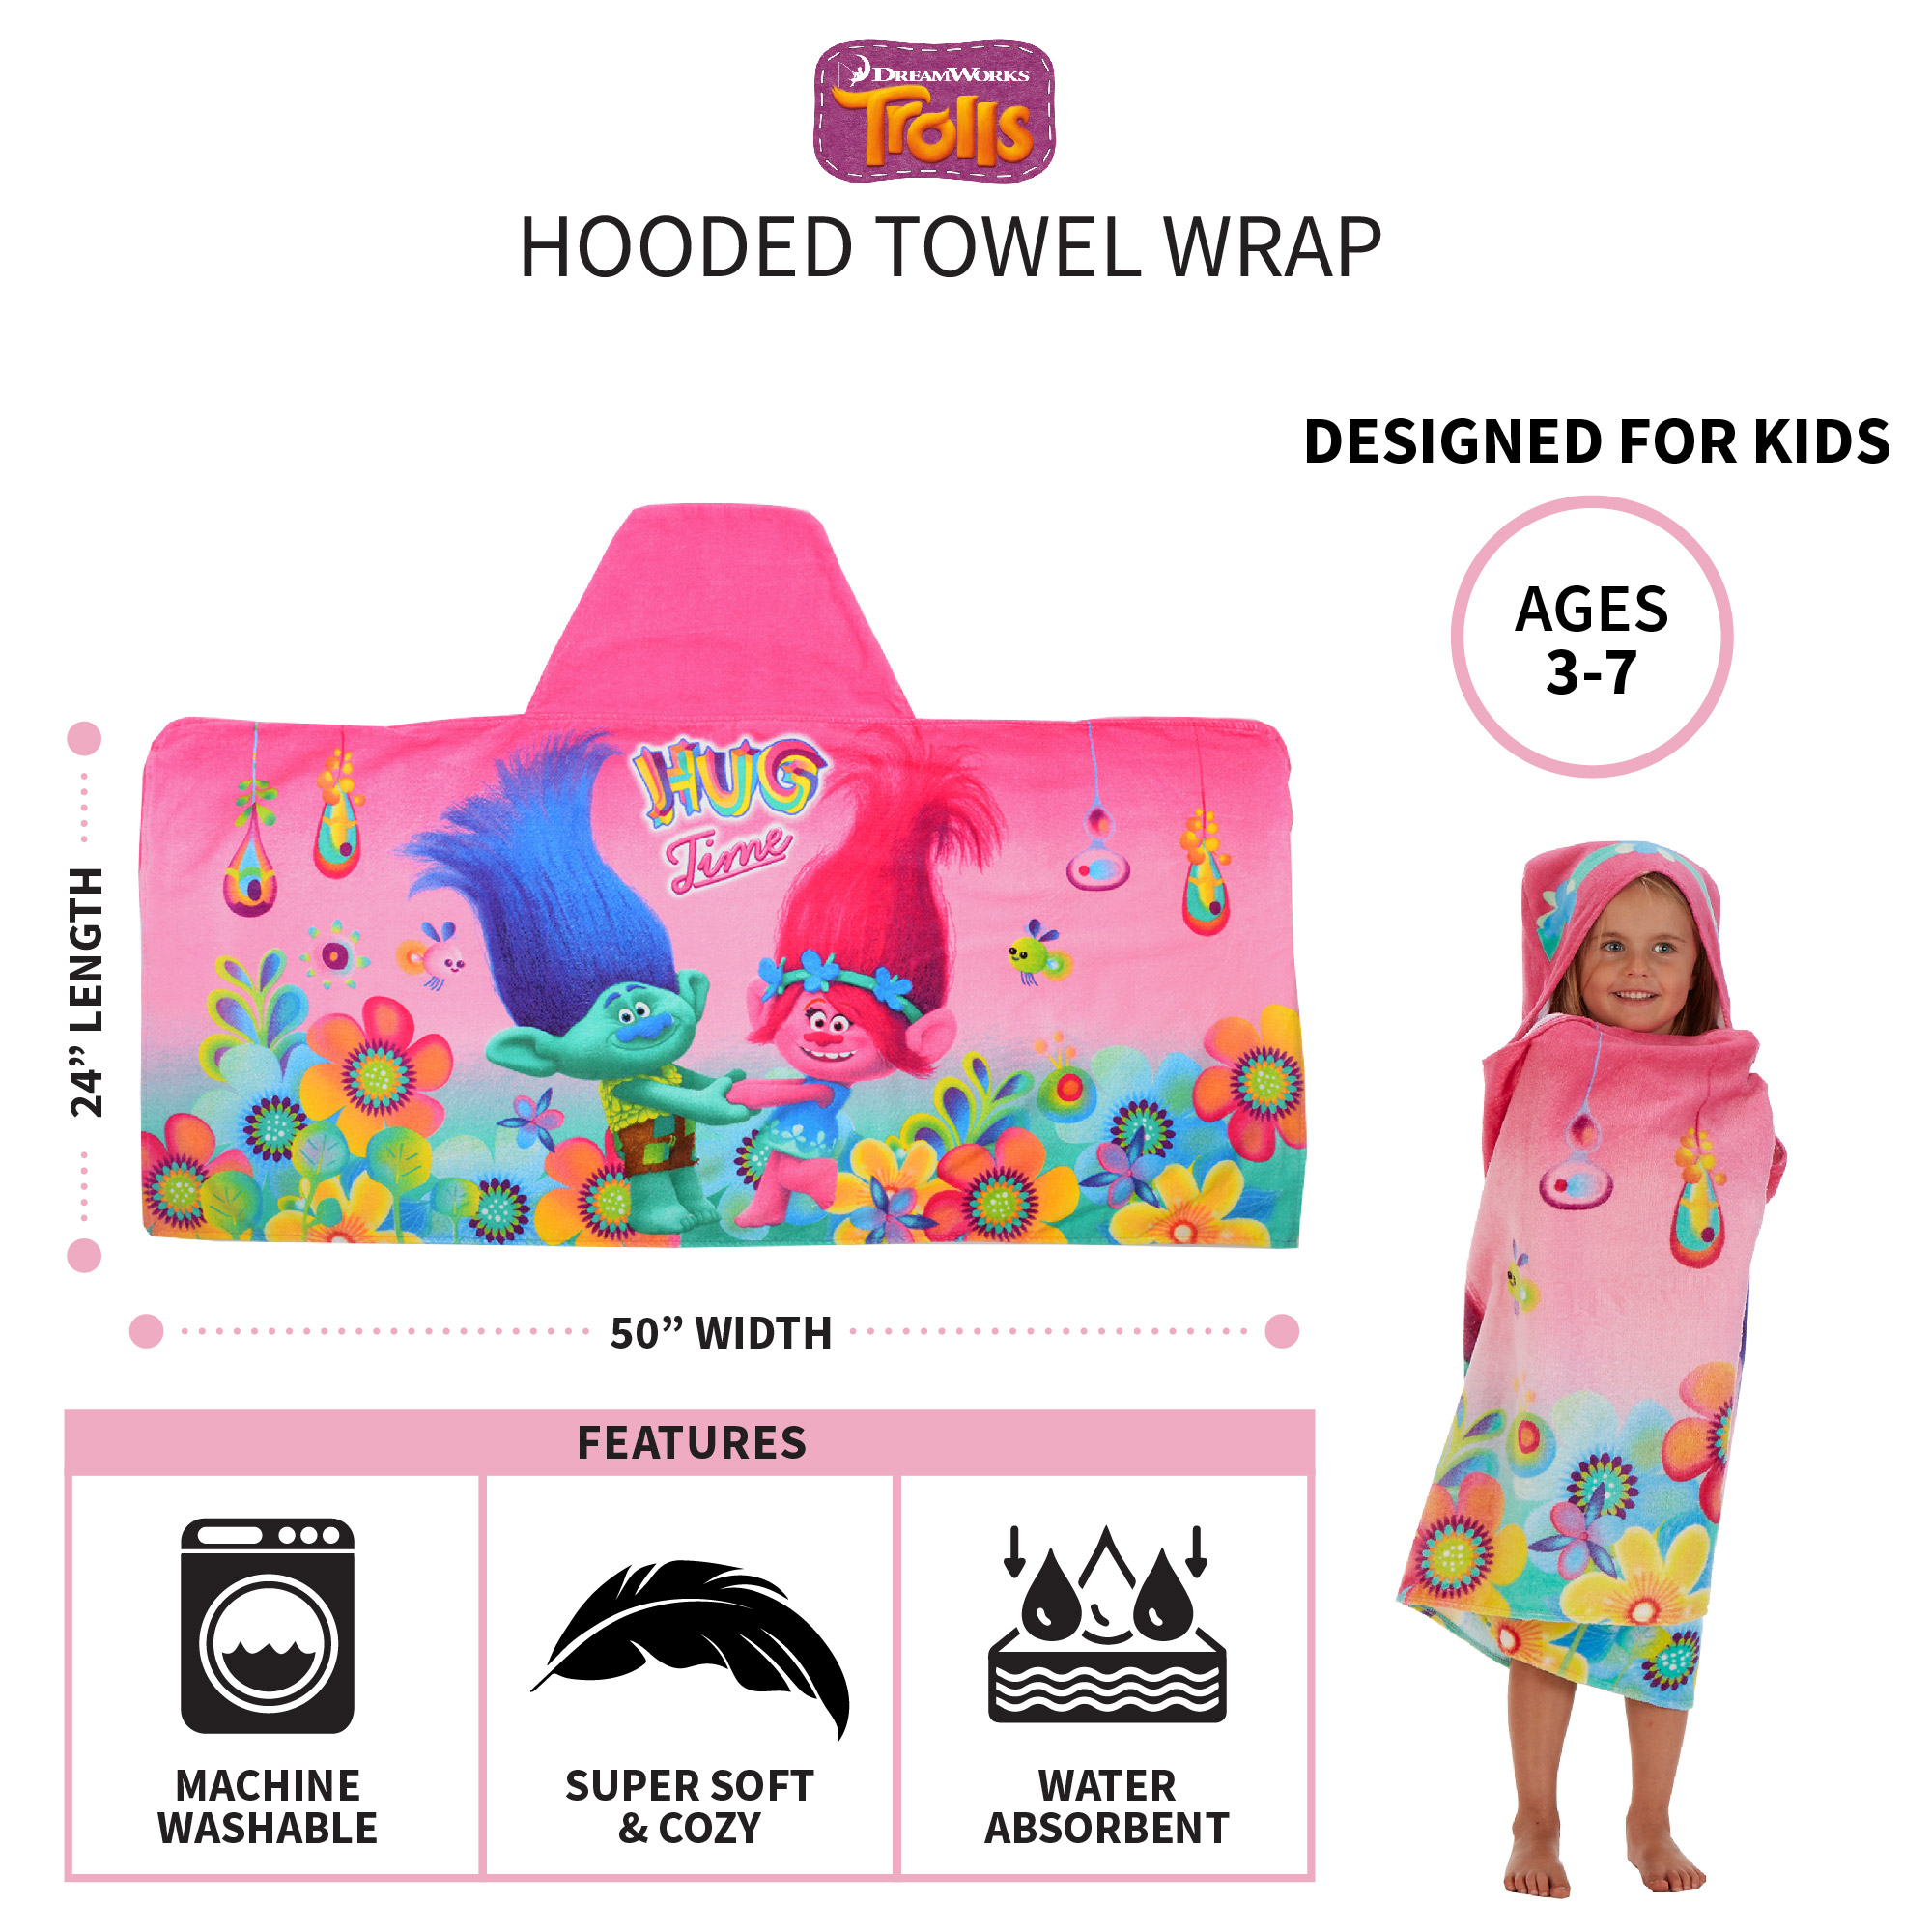 Trolls Kids Bath and Beach Hooded Towel Wrap, 100% Cotton, Pink - image 4 of 9